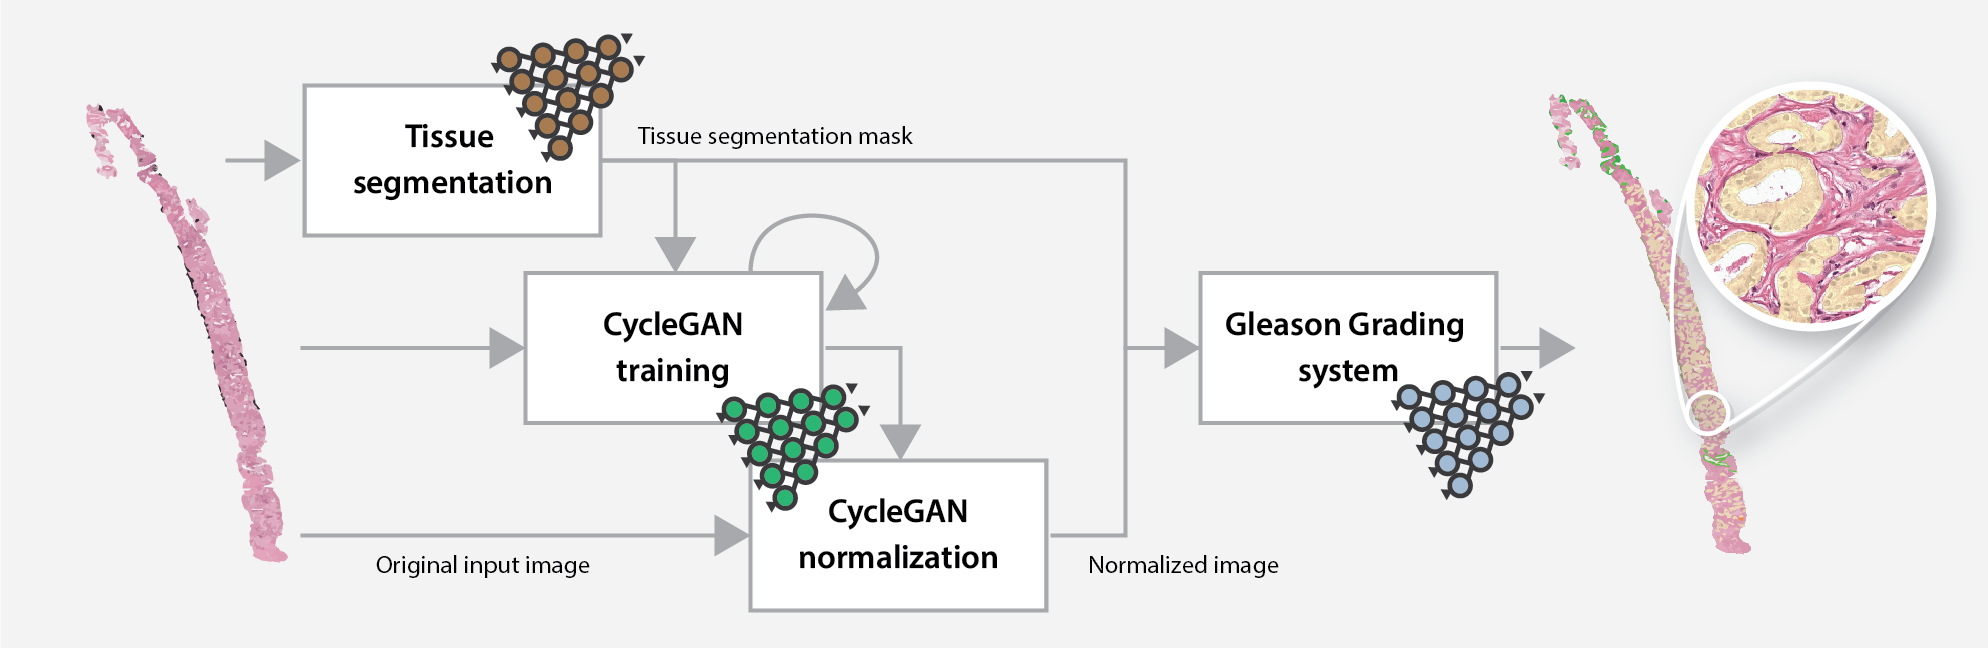 Overview of the online Gleason grading algorithm, including the normalization step.